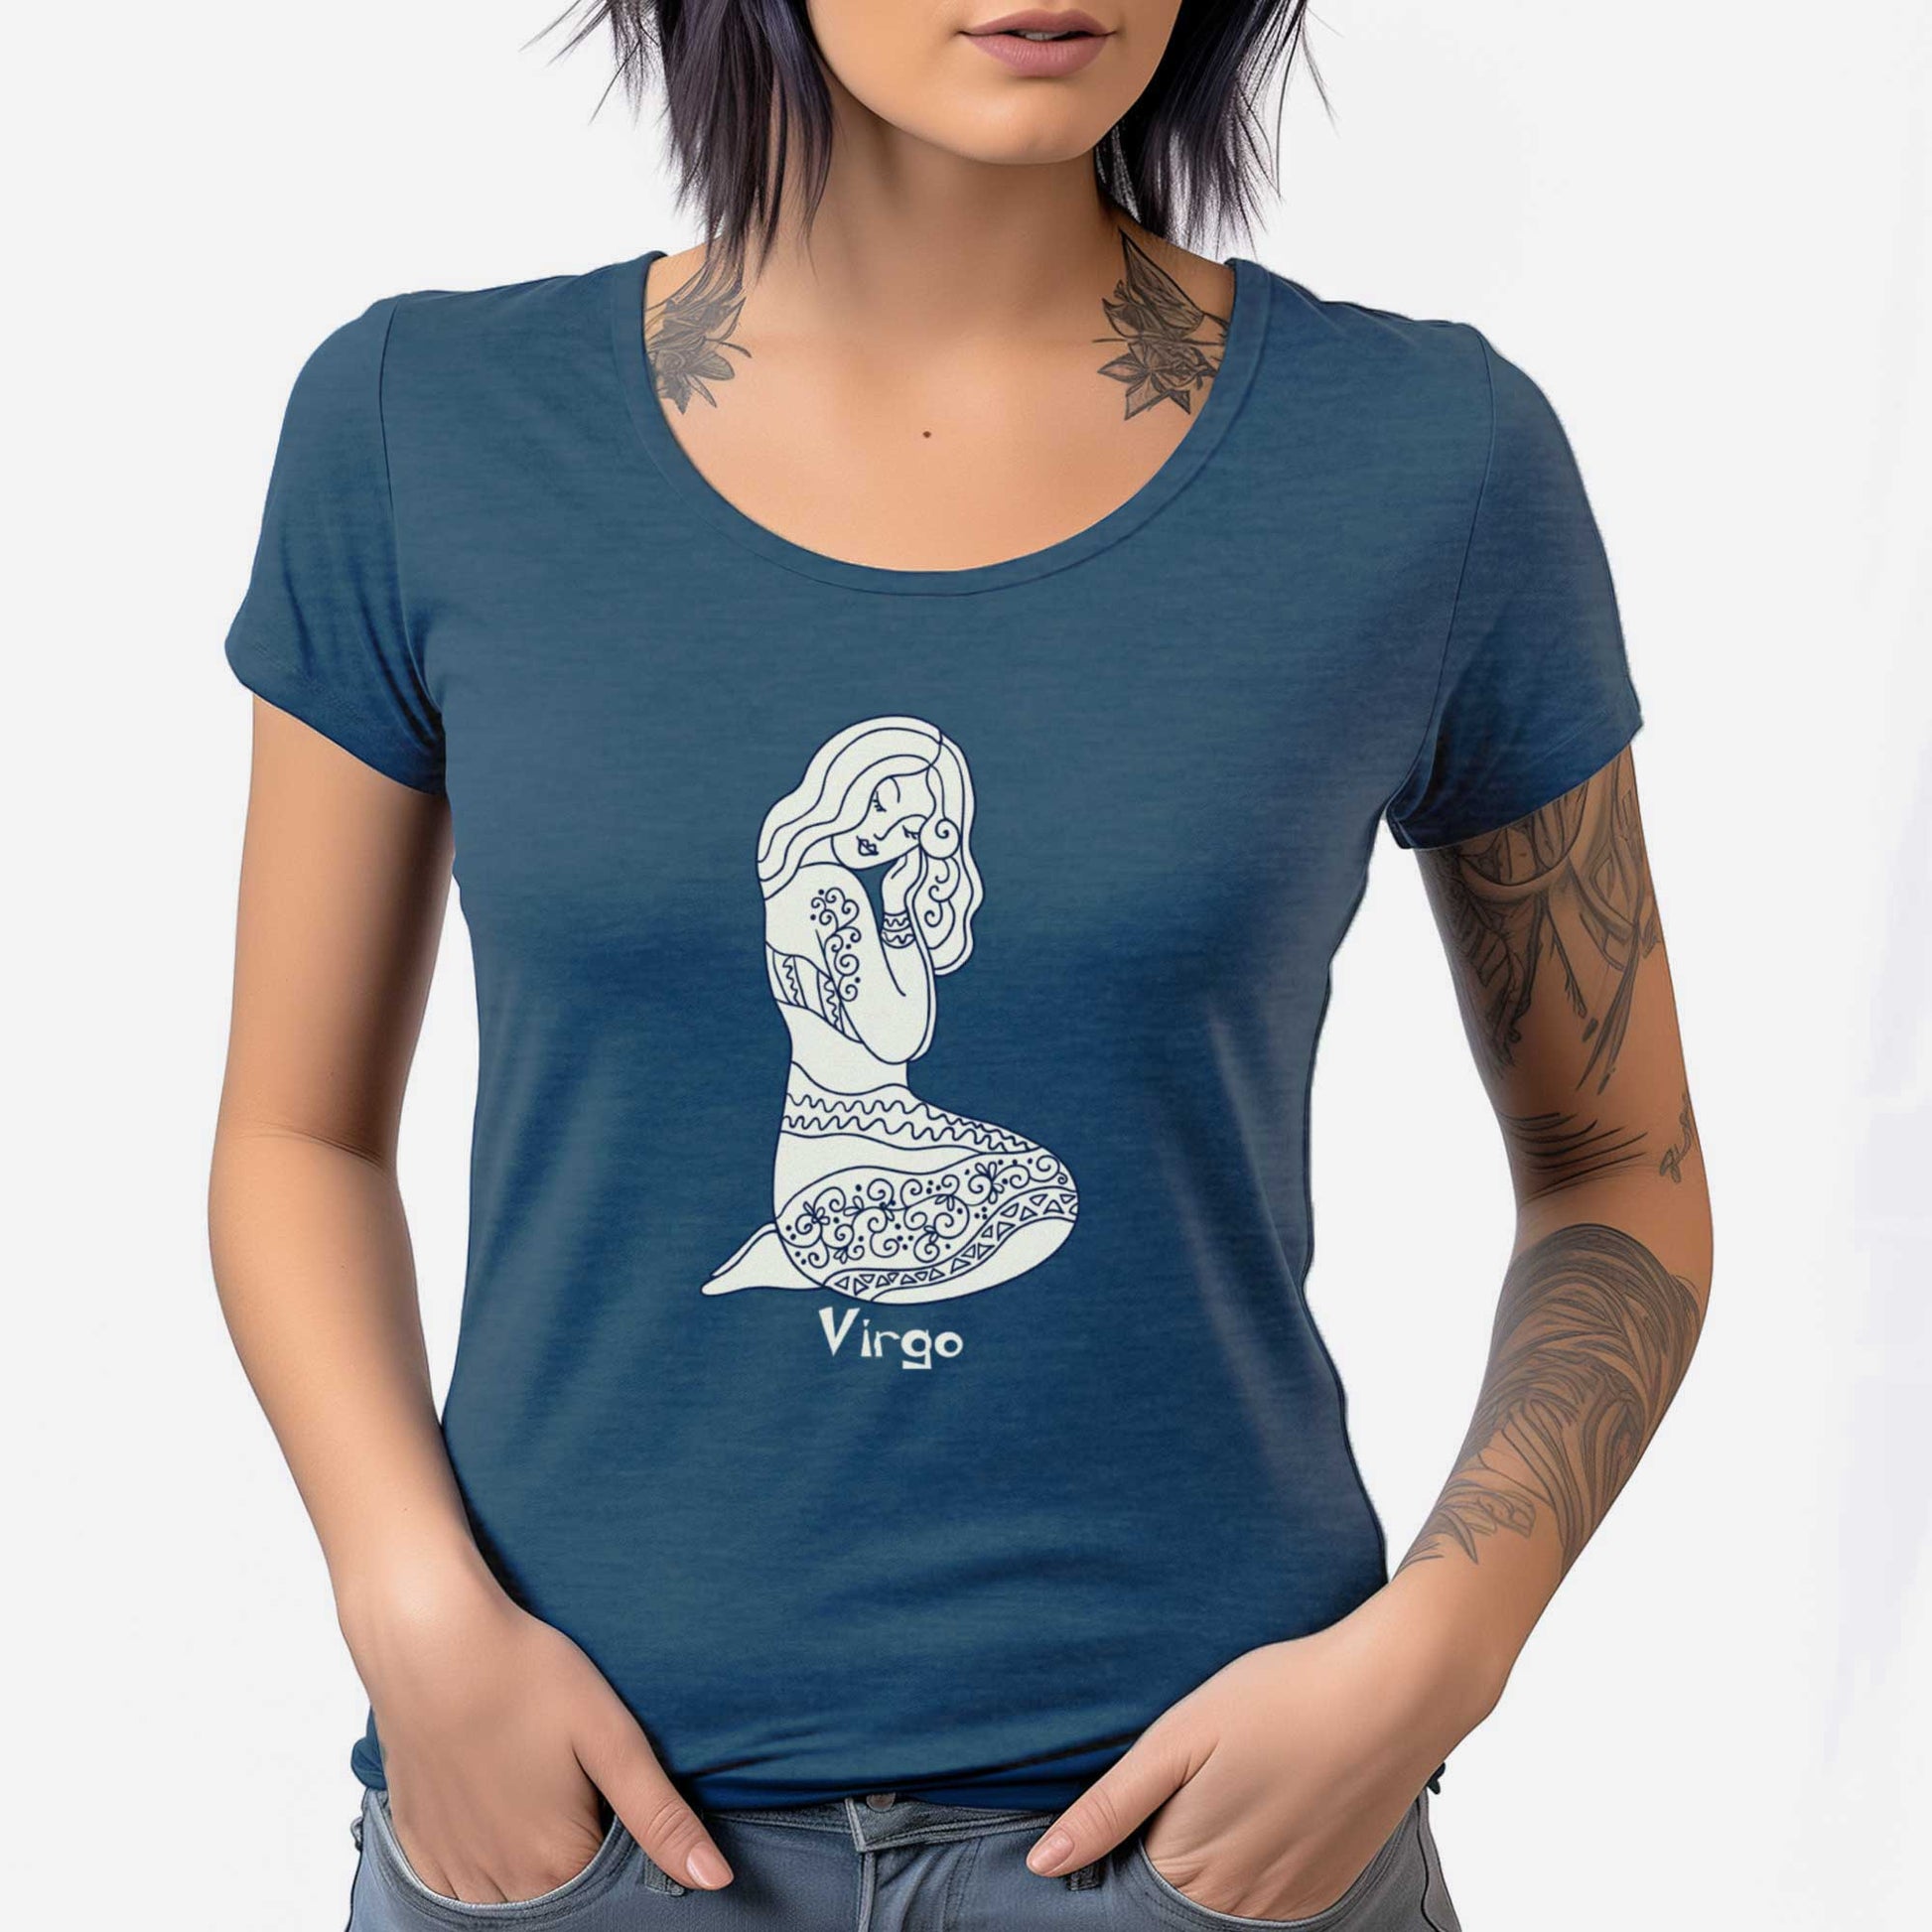 A woman wearing a heathered neptune District 7501 scoop neck t-shirt featuring the zodiac symbol of Virgo, the maiden, in a Mediterranean style.